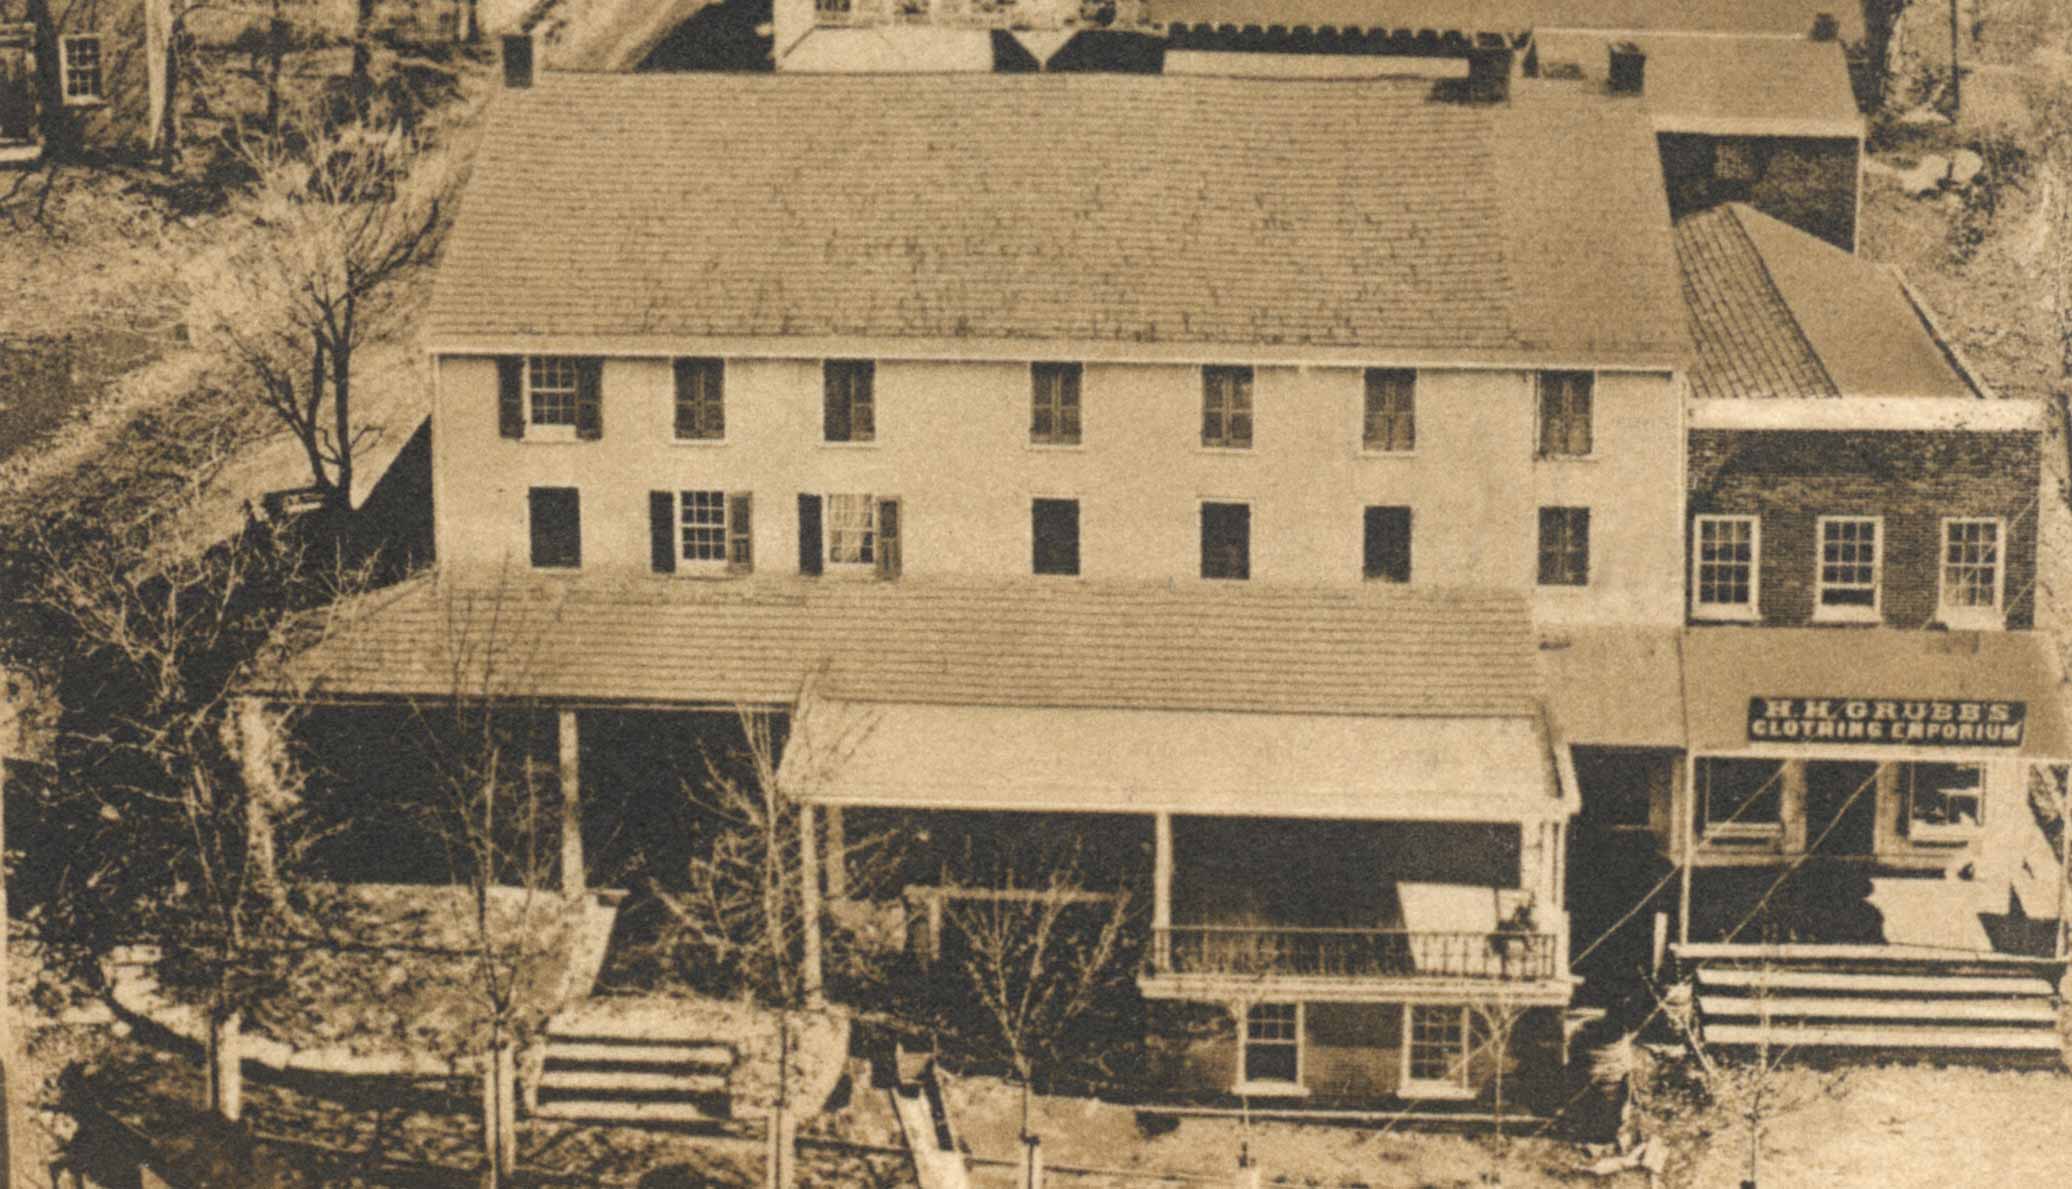 Photo of the Oxford Hotel taken from the Town Hall circa 1865